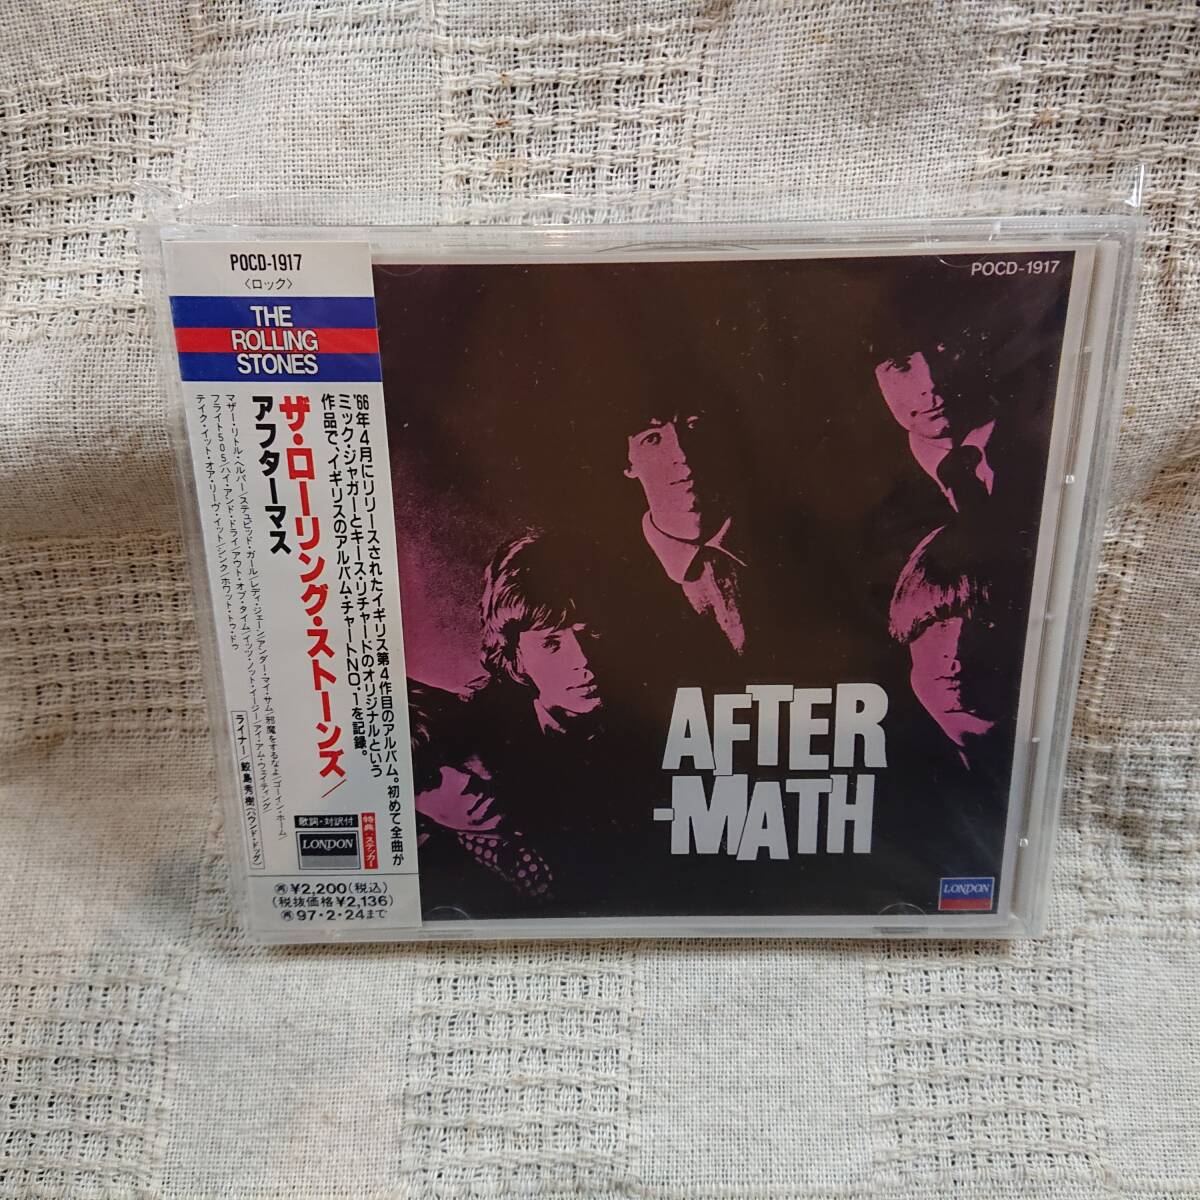 　AFTERMATH THE ROLLING STONES 　ザ・ローリング・ストーンズ CD 帯付き　送料定形外郵便250円発送[Ad] _画像1